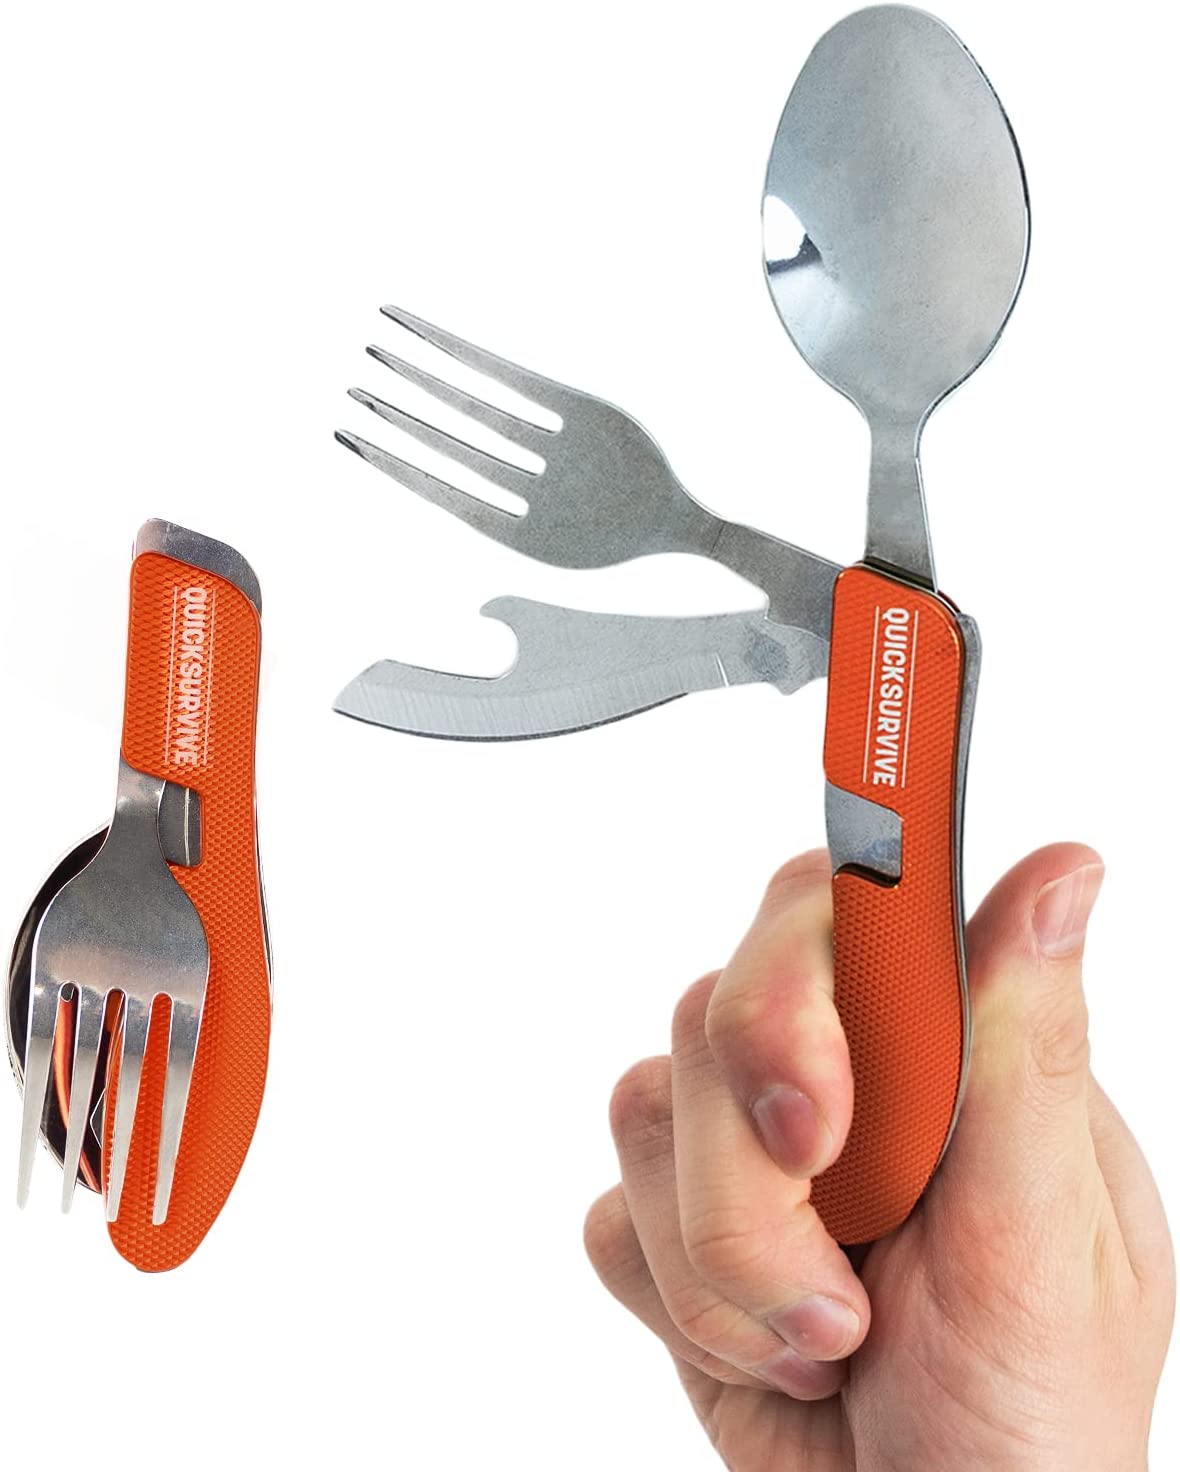 GS Knife Co. 4 Piece 4-IN-1 Snapatite Backpacking Utensil Set